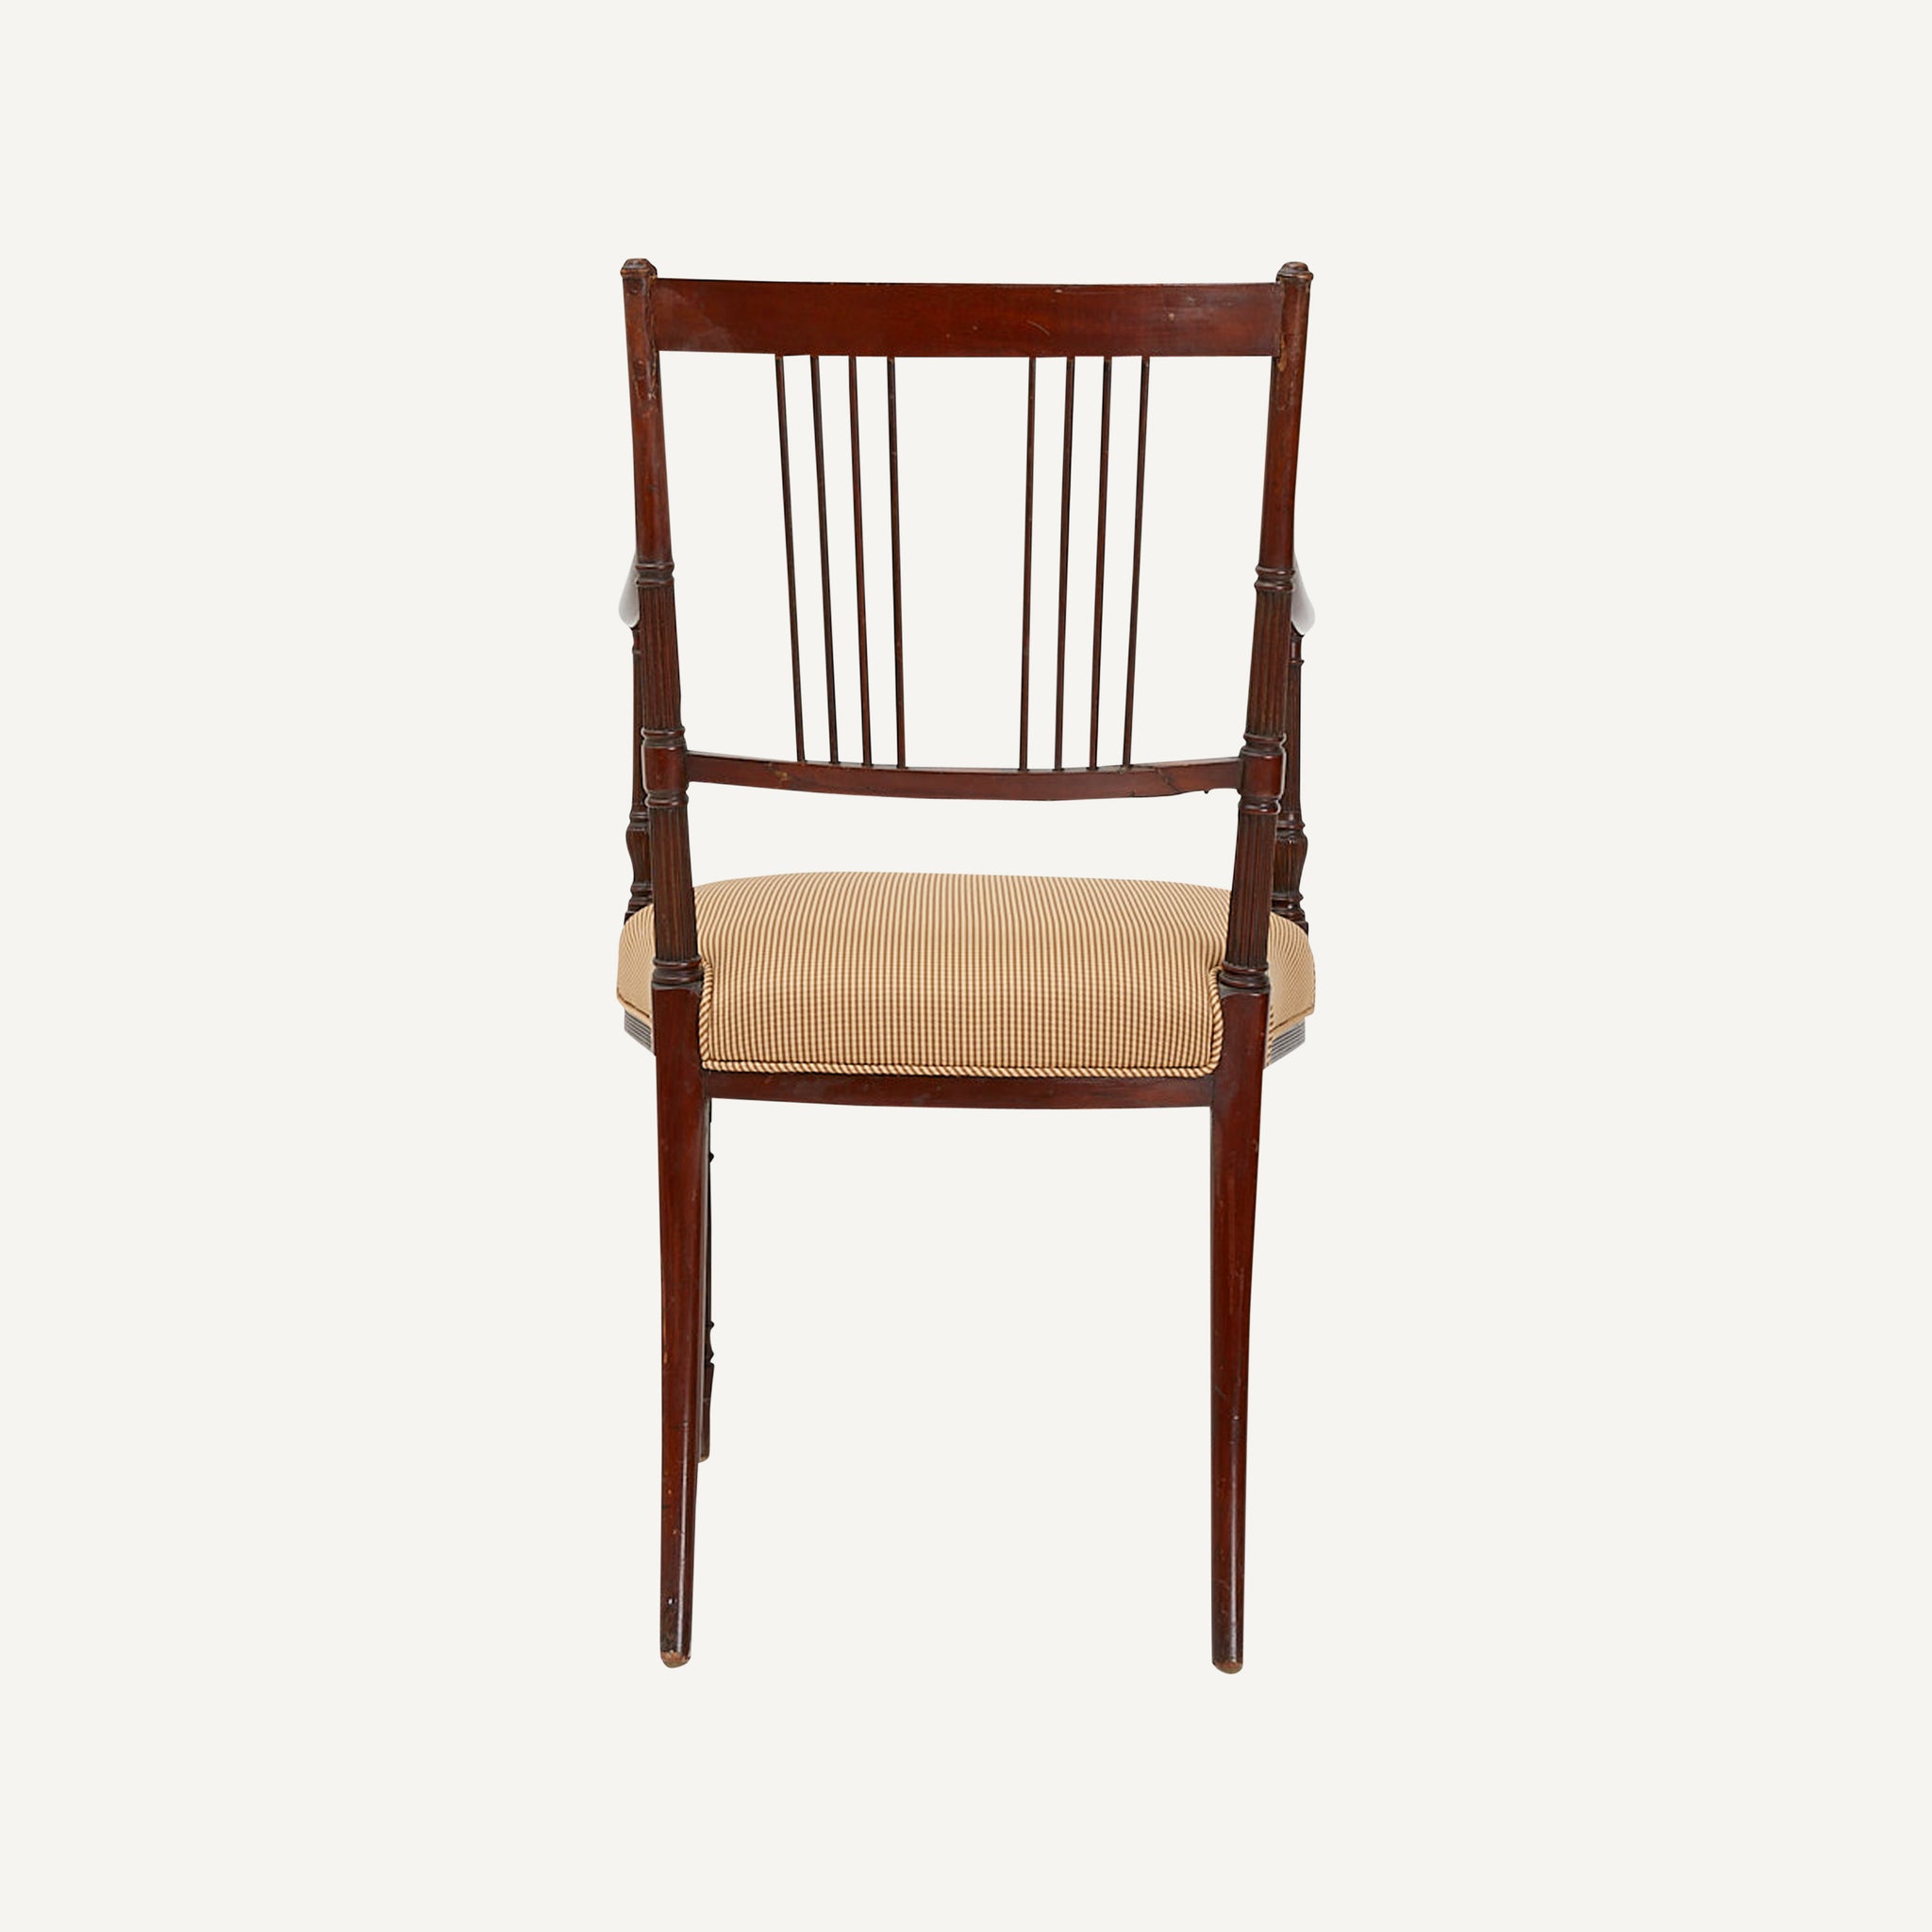 ANTIQUE FEDERAL STYLE ARMCHAIR